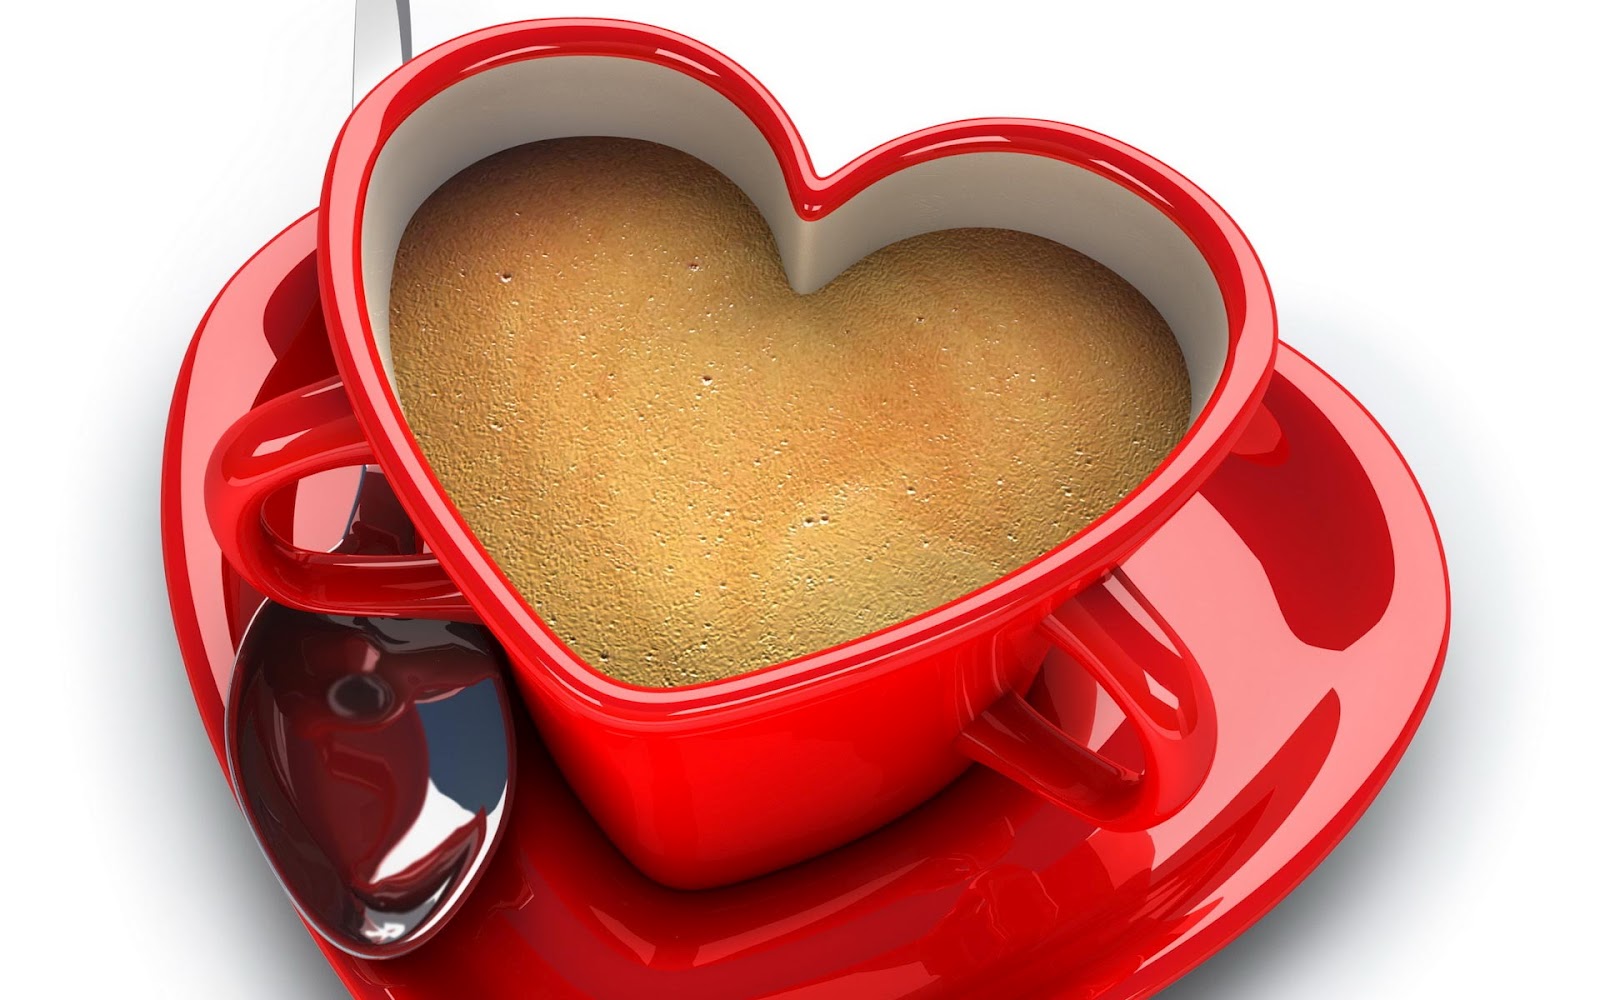 fb wallpaper,cup,coffee cup,heart,cup,love